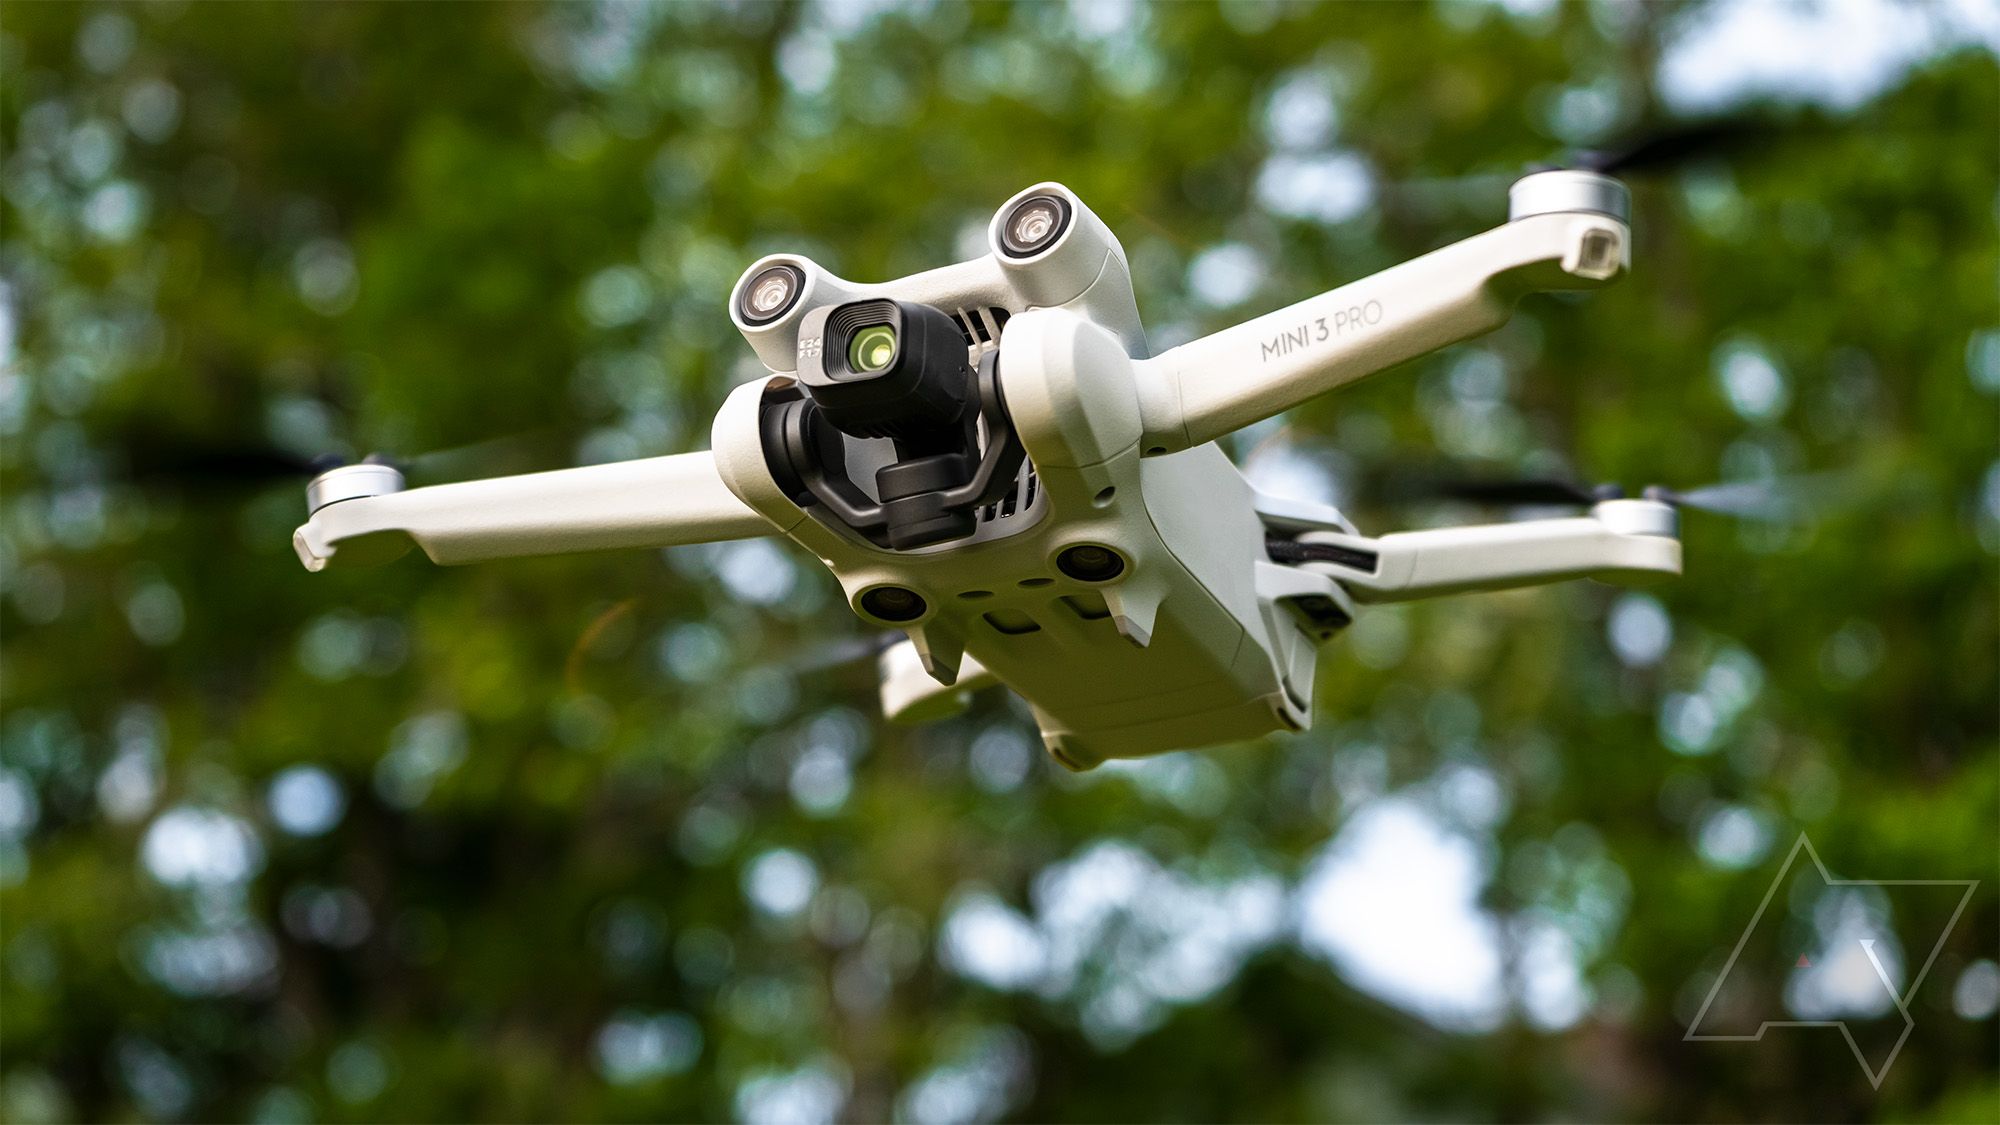 DJI Mini 3 Pro review The best pick for a small drone Flipboard